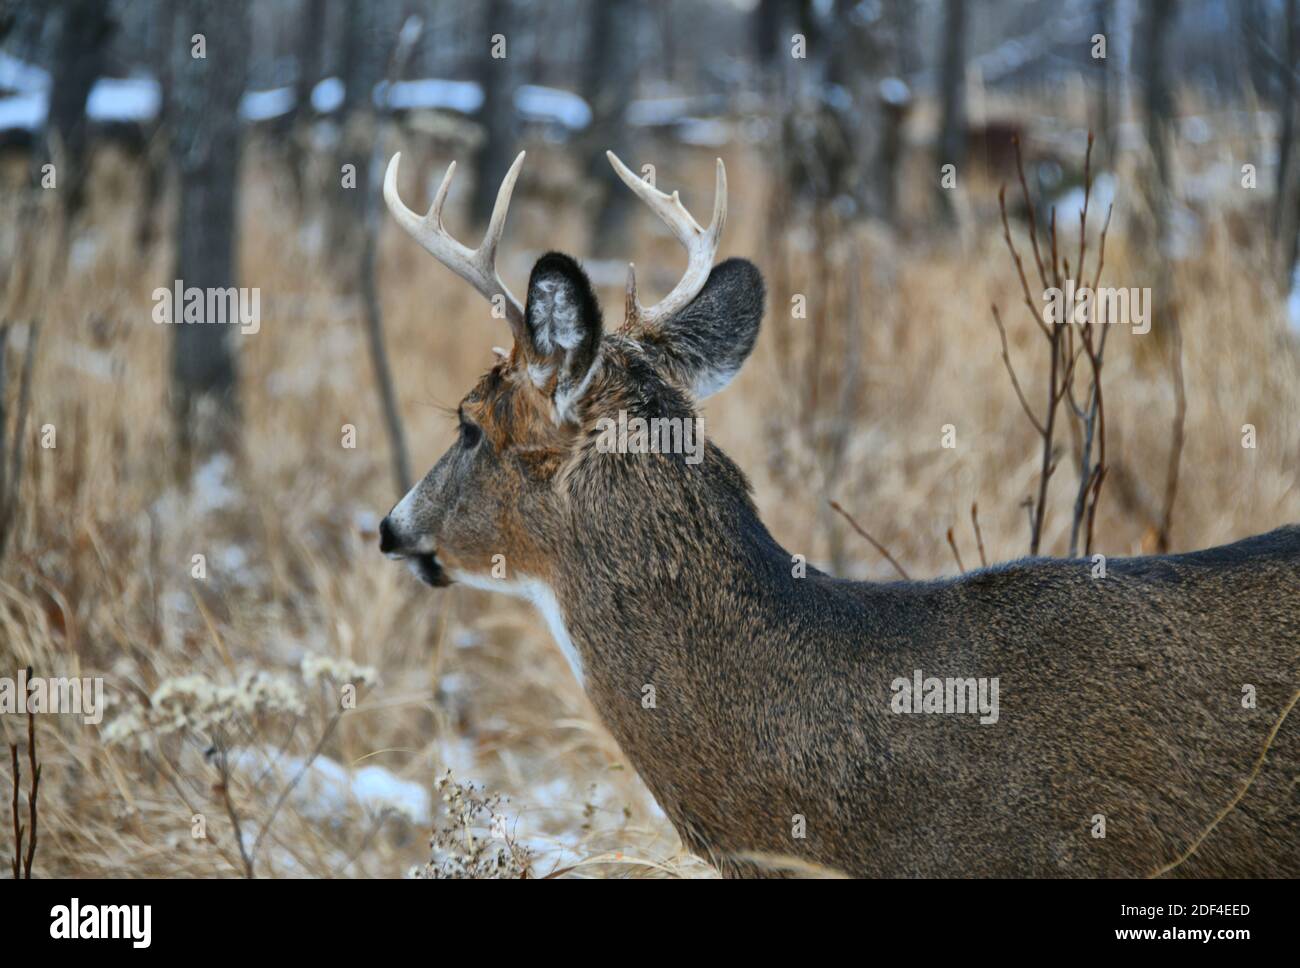 A side view of a male deer standing amidst tall dry grass and tree trunks by Thunder Bay, Ontario, Canada. Stock Photo